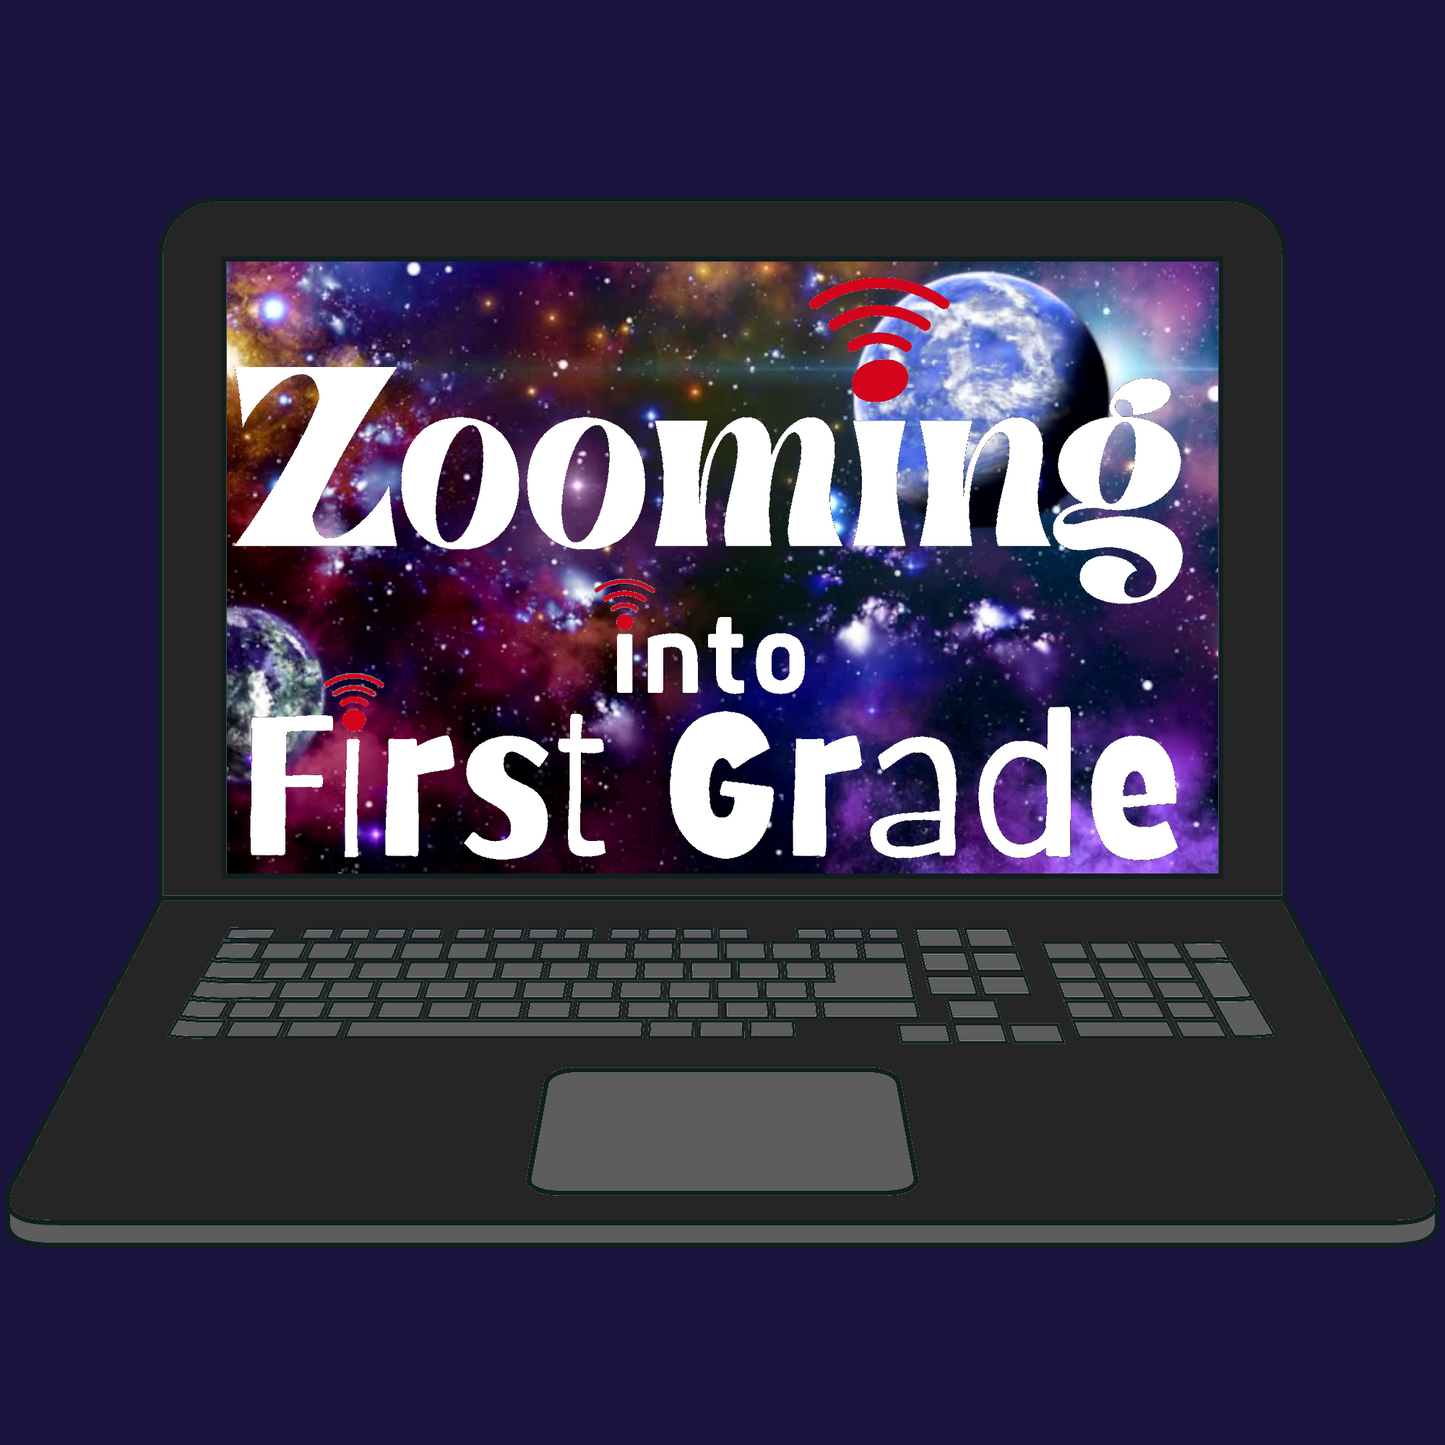 Zooming into First Grade